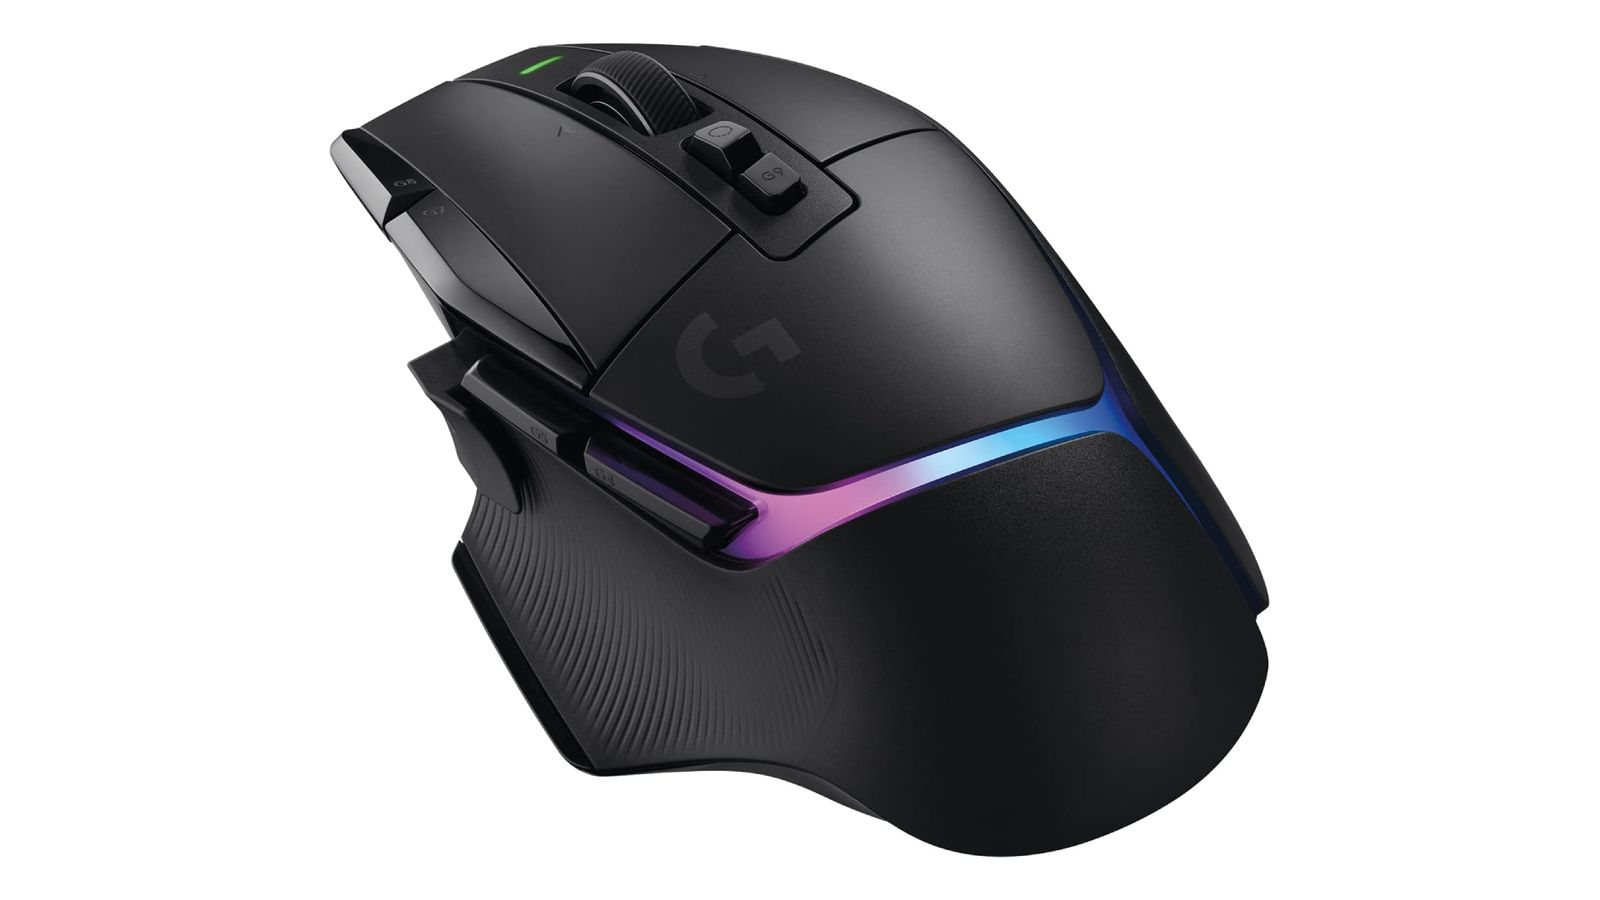 Logitech G502 X Plus product image of a black mouse with pink and blue lighting cutting through the middle.